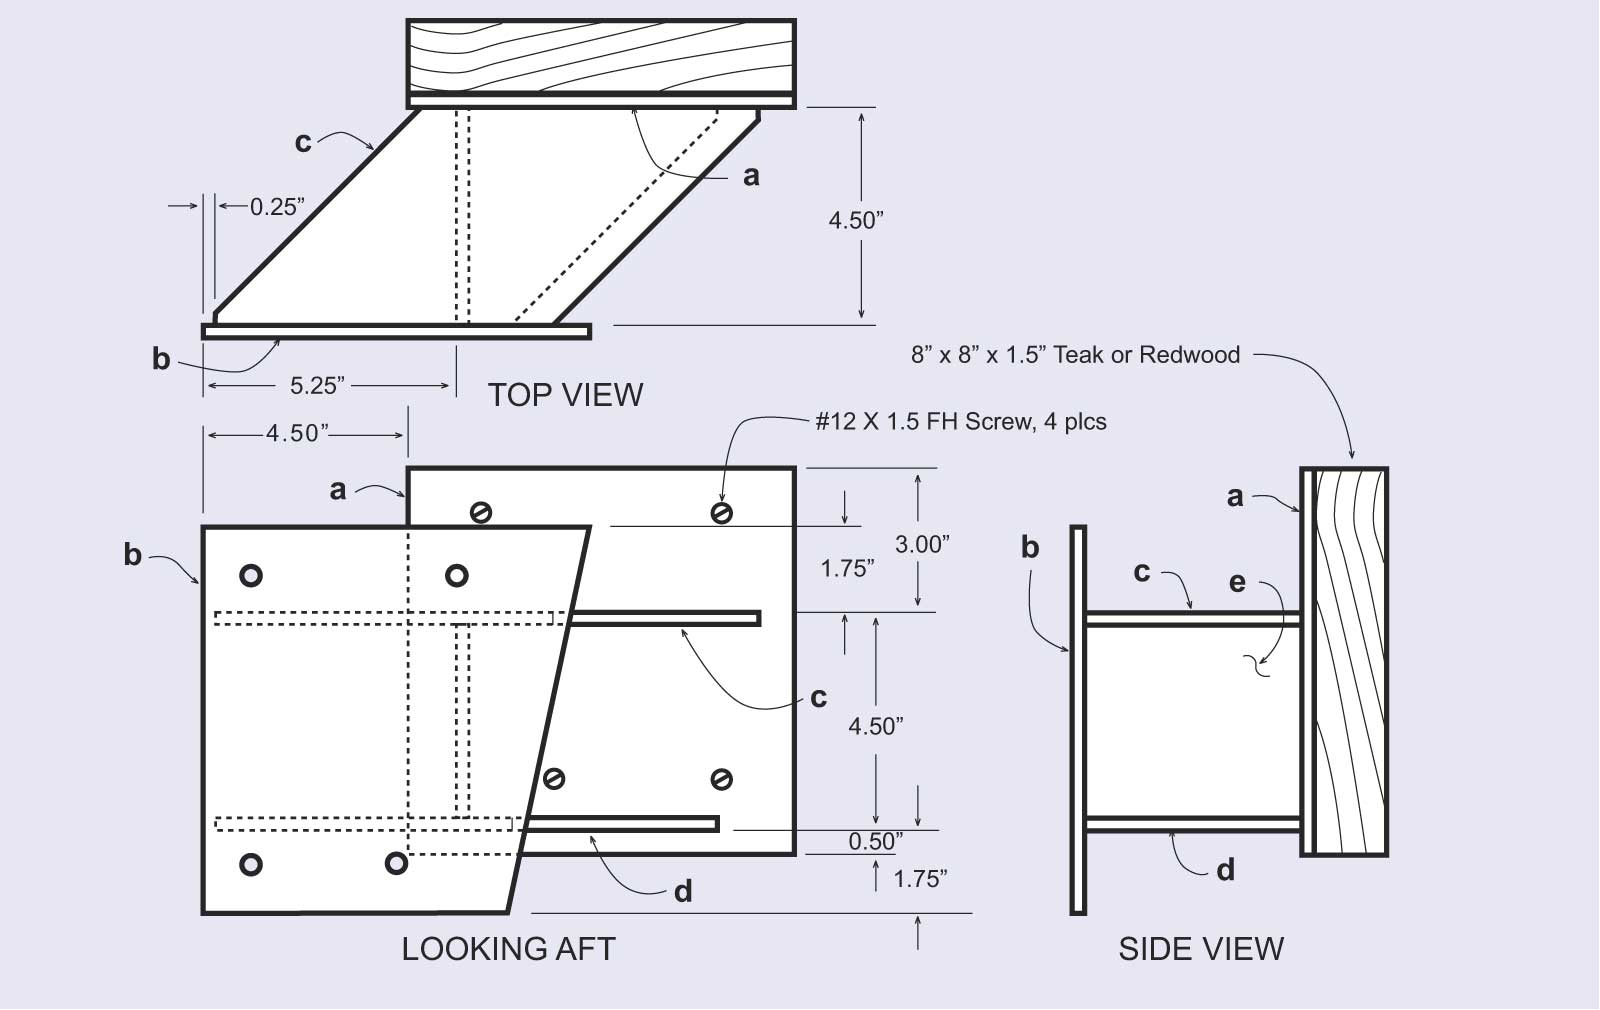 DWG: Unassembled aluminum pieces required for bracket